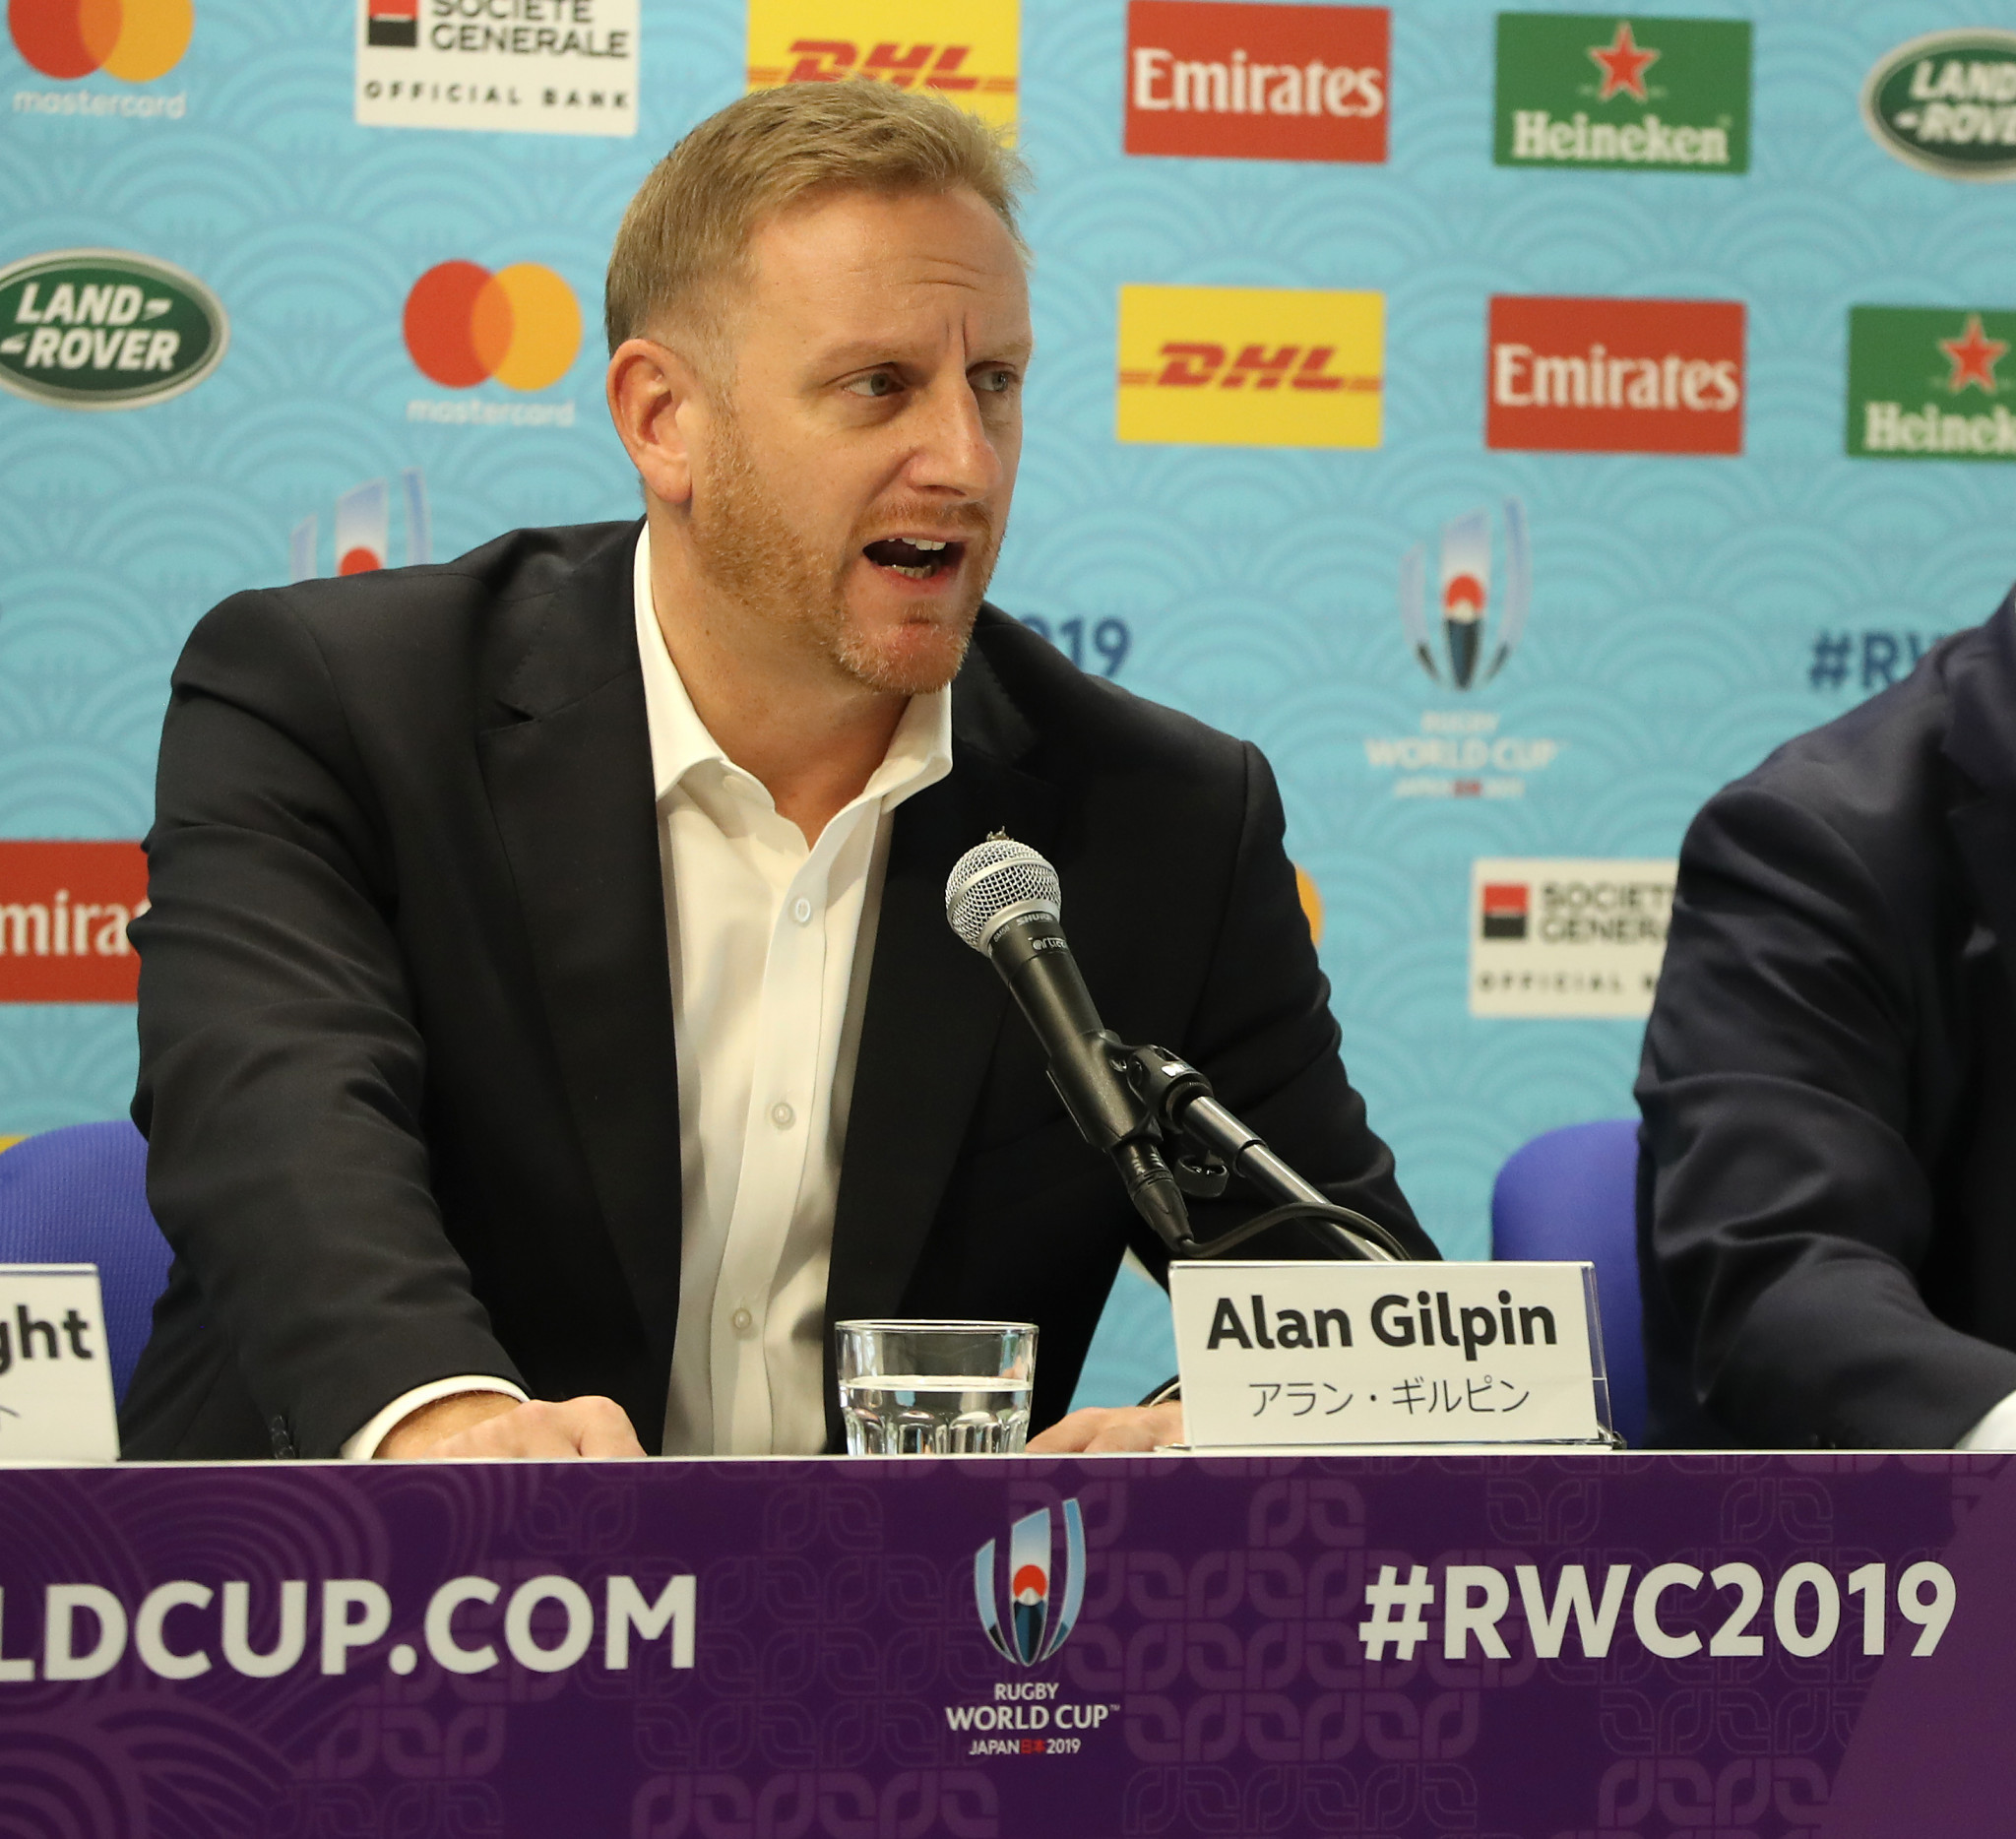 World Rugby chief operating officer and Rugby World Cup head Alan Gilpin described last year's event as one of the 